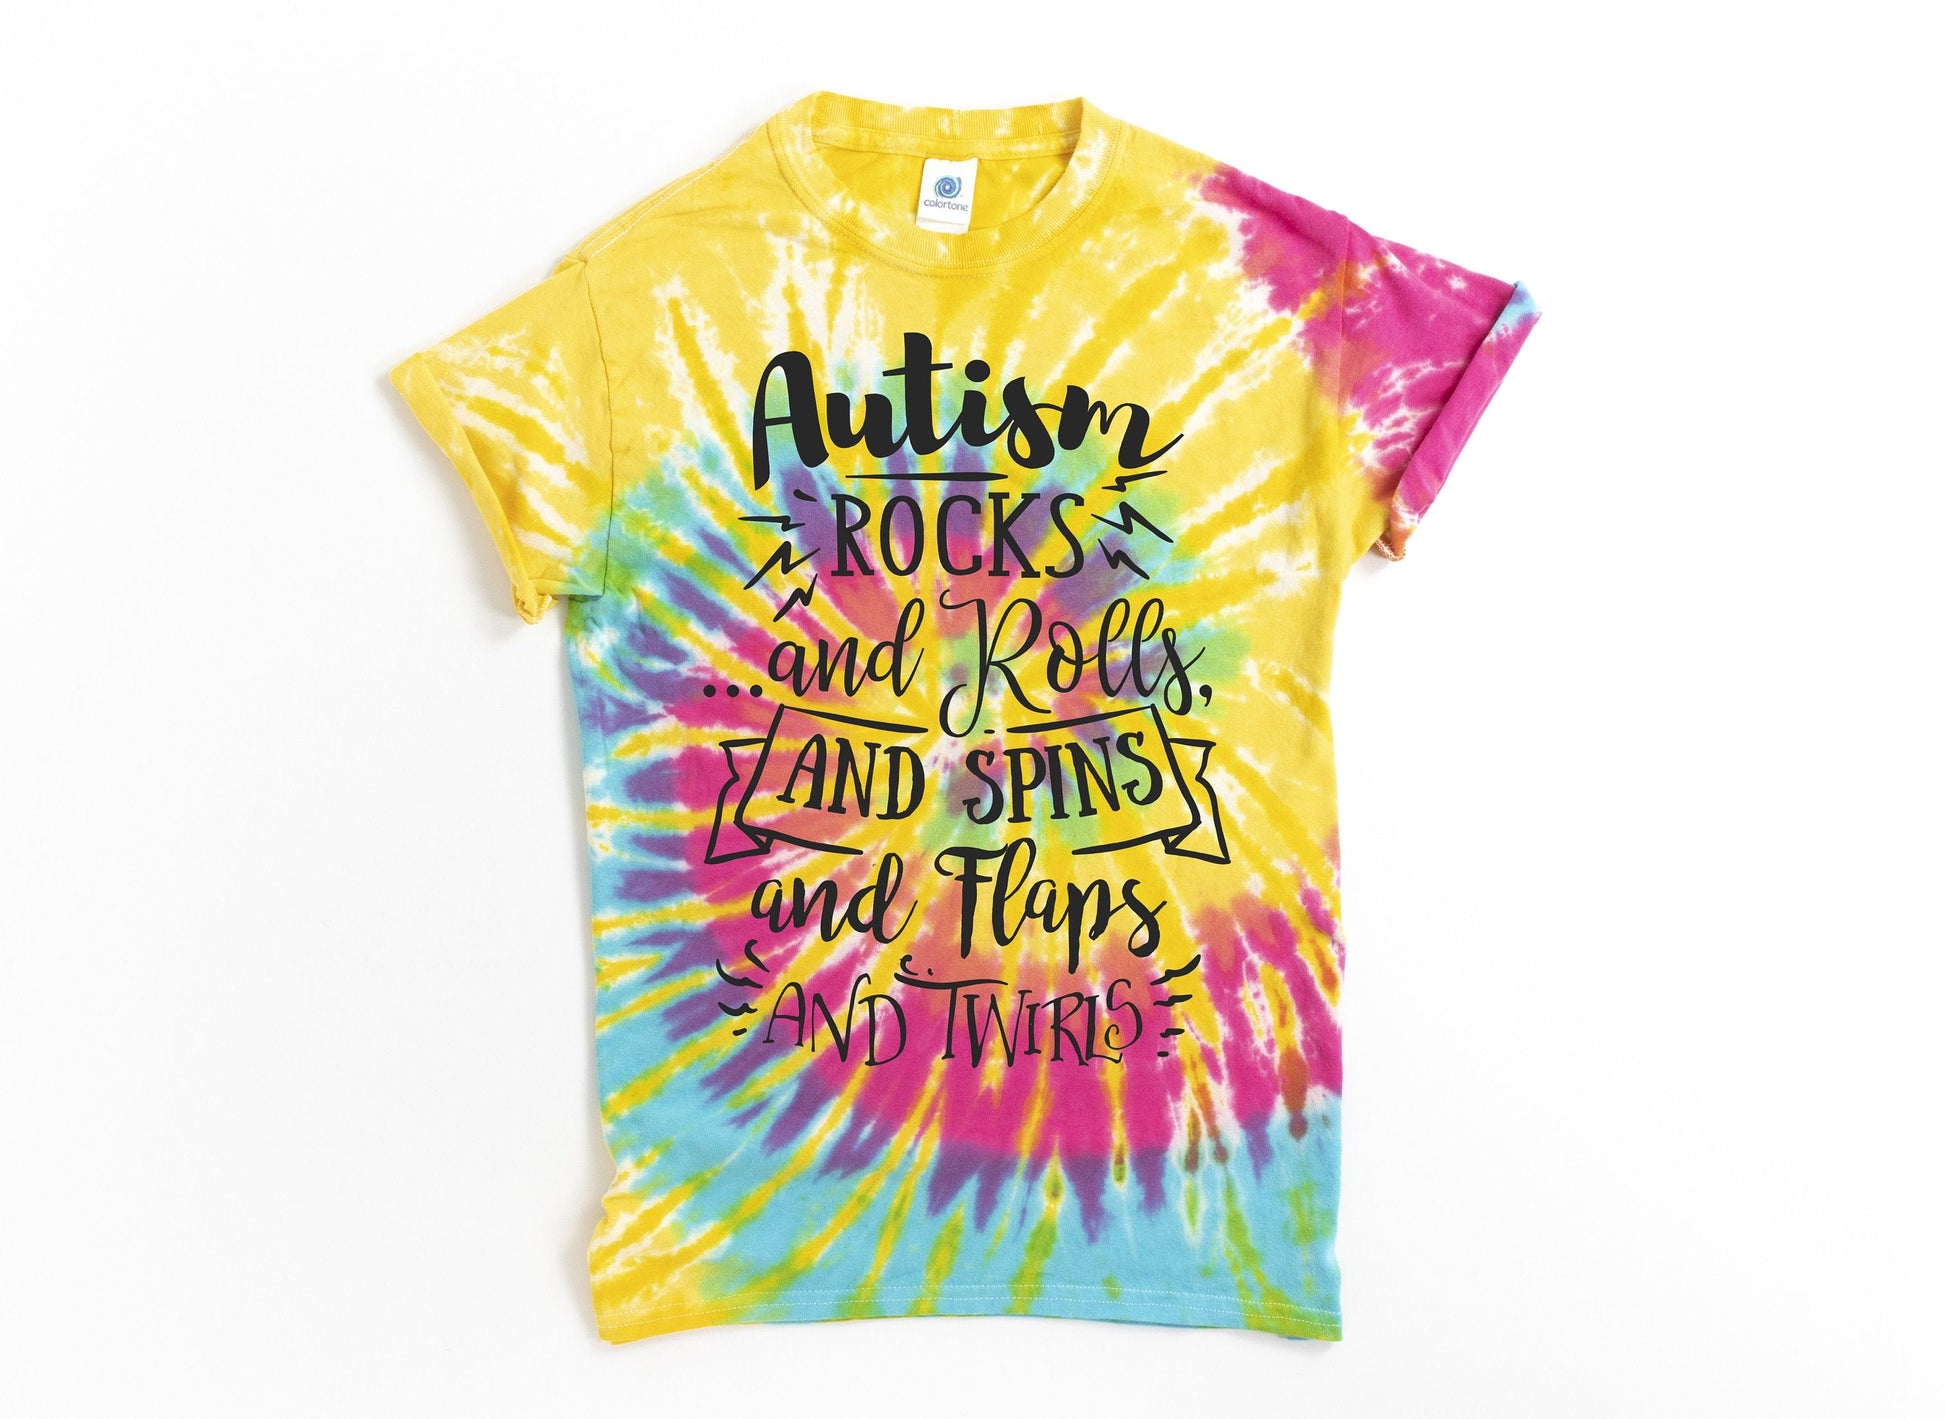 Autism Rocks and Rolls Tie Dye unisex t-shirt - Kids and Adults Sizes - Autism Awareness Shirt - Autism Support - Autism Kids Shirt